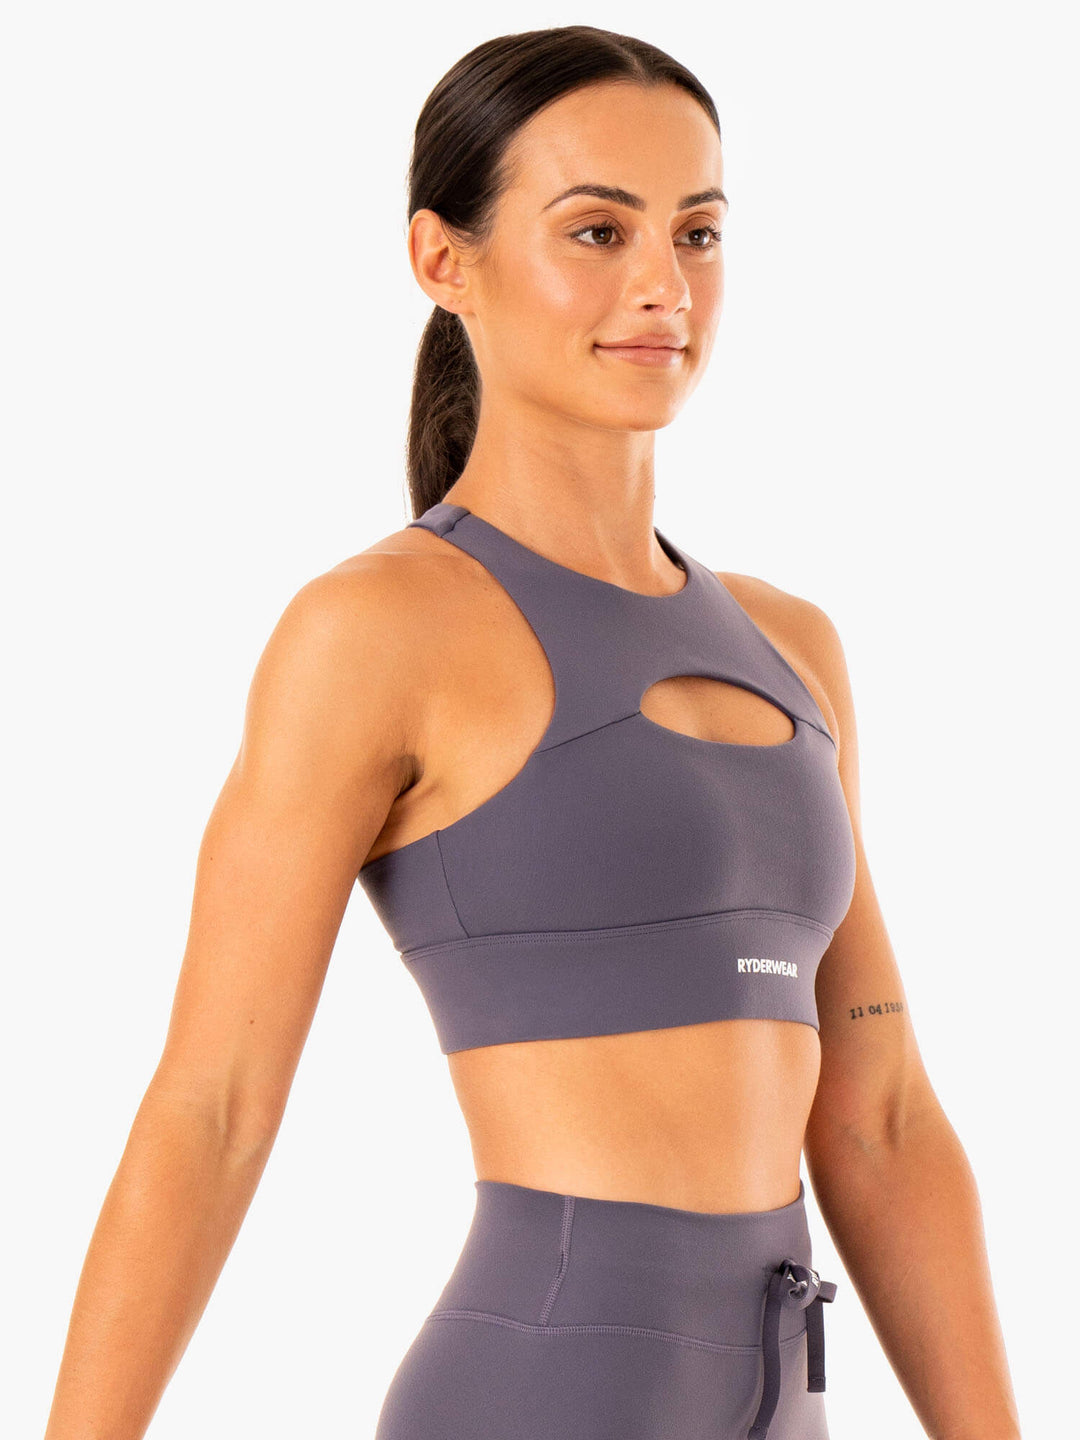 Replay Cut Out Sports Bra - Charcoal Clothing Ryderwear 